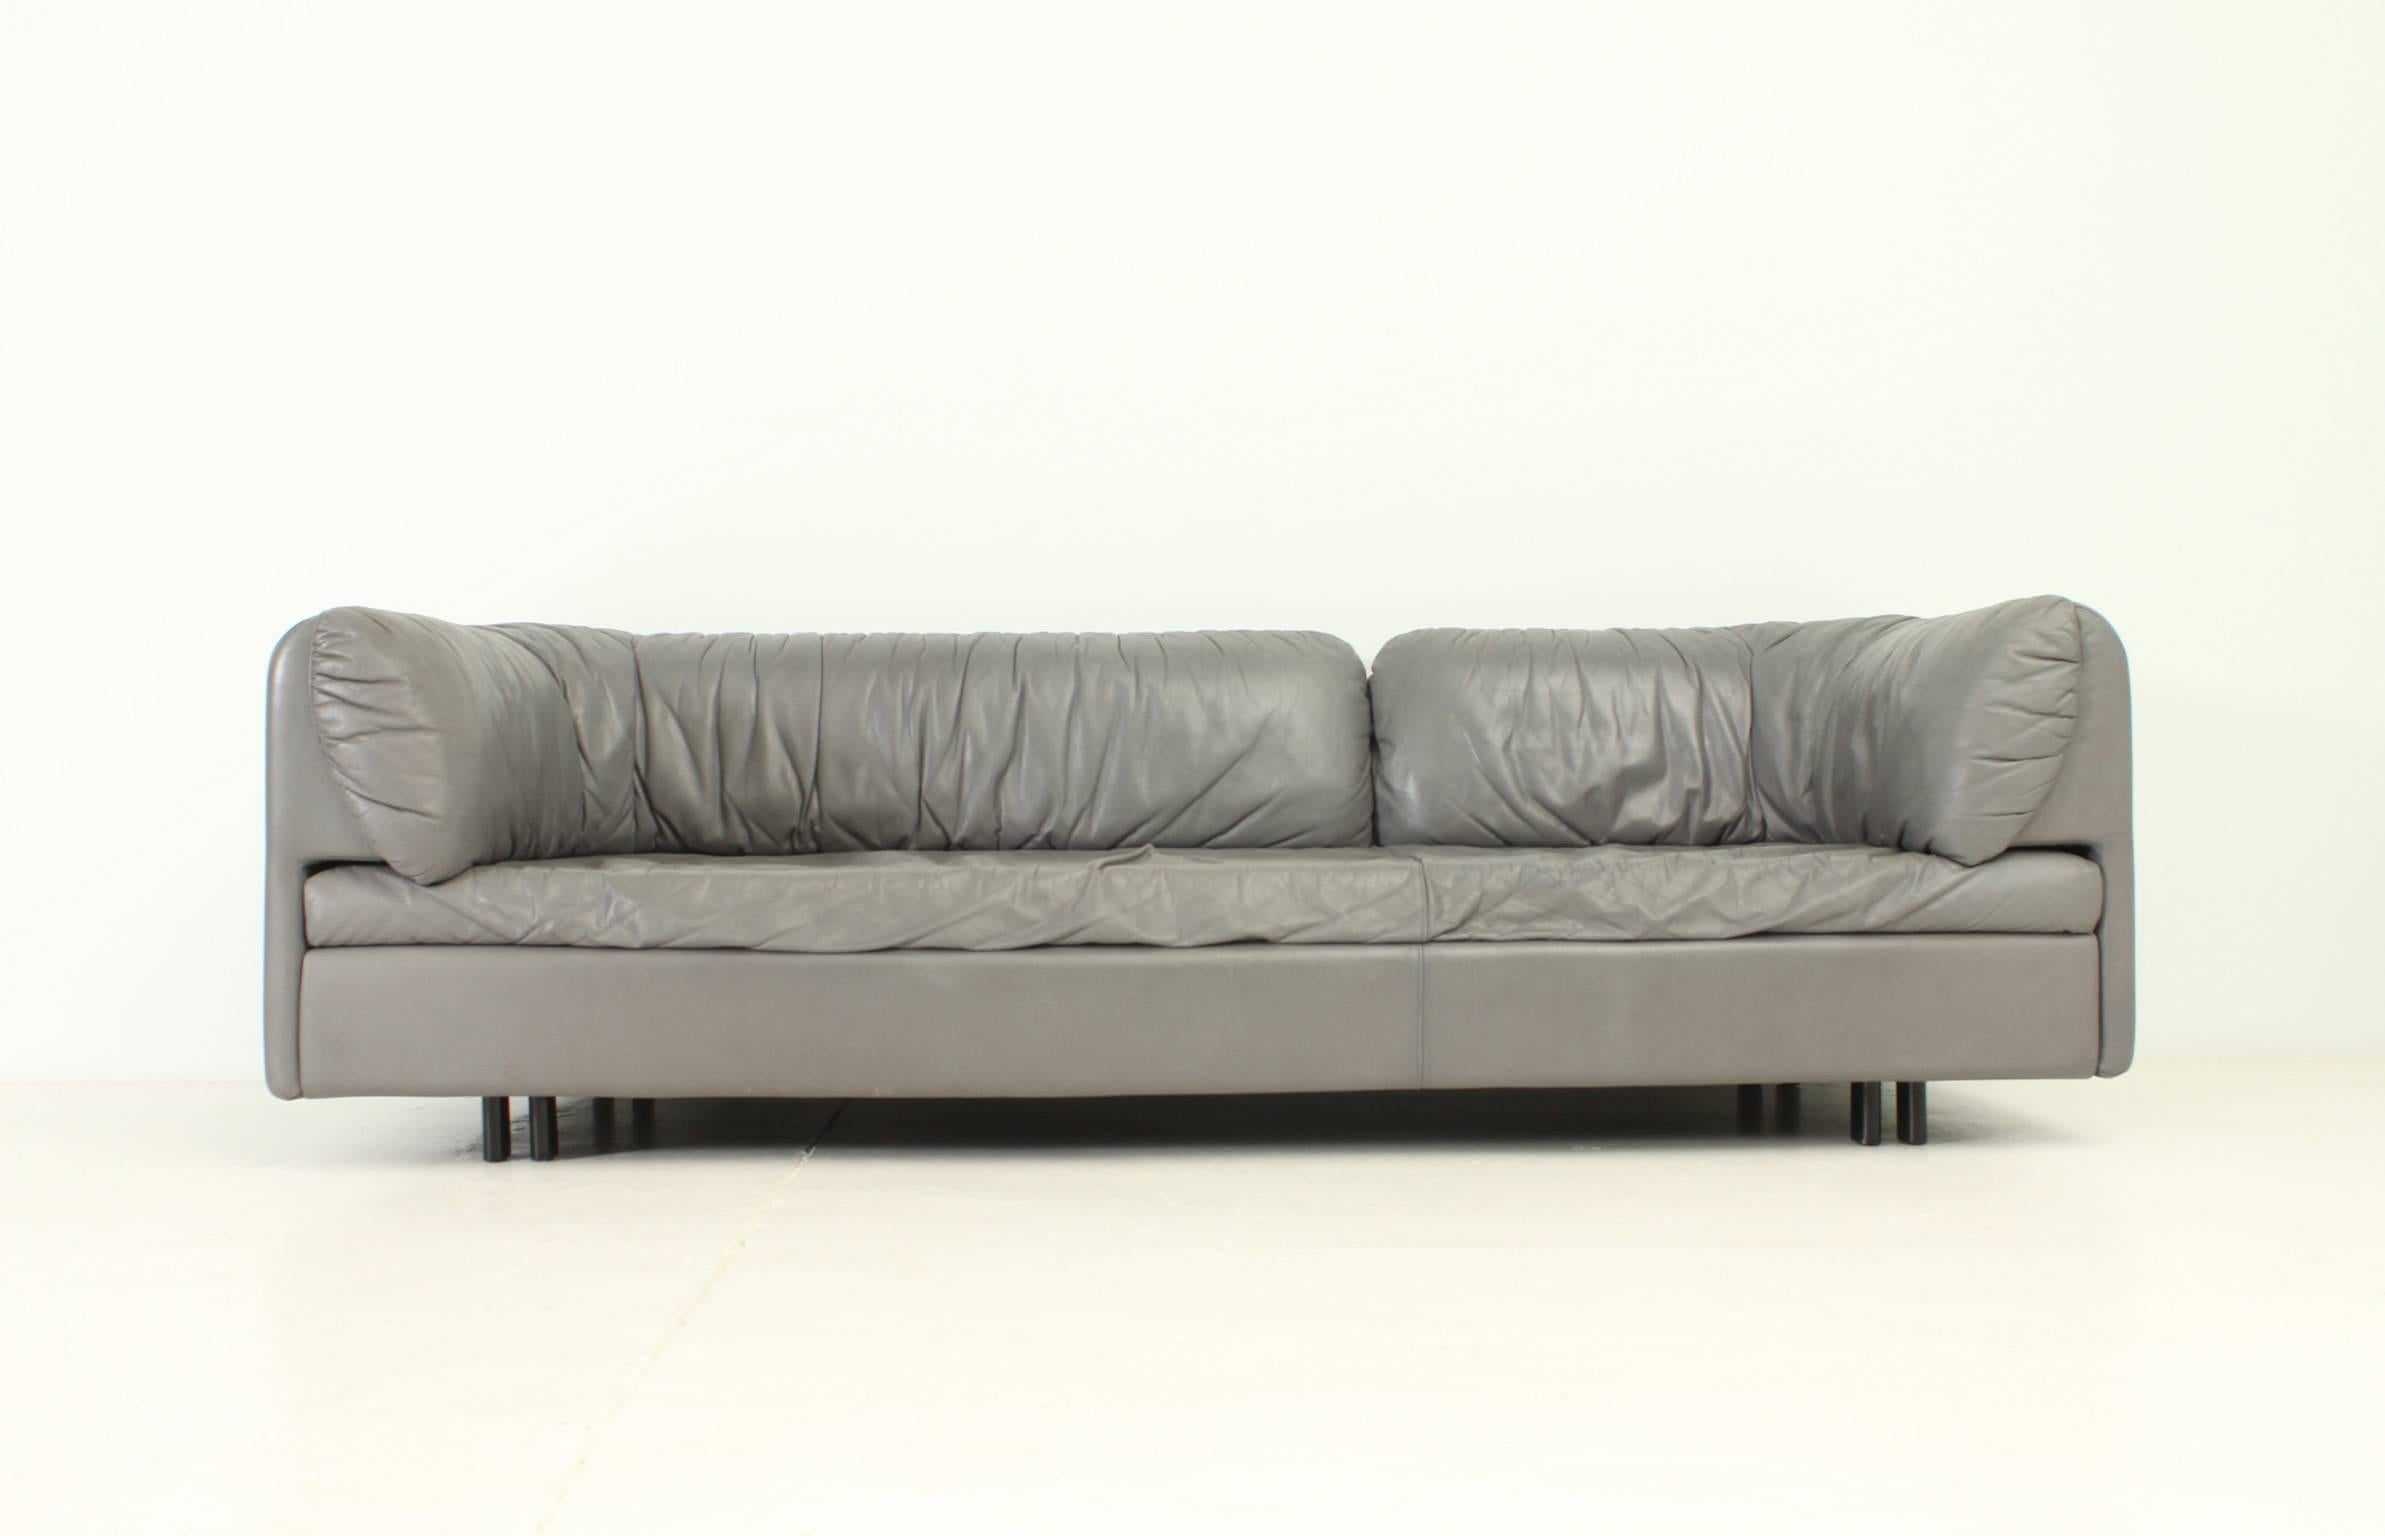 Sofa model Pacific designed in 1983 by Cini Boeri for Arflex, Italy. Upholstered in grey leather with two different textures.